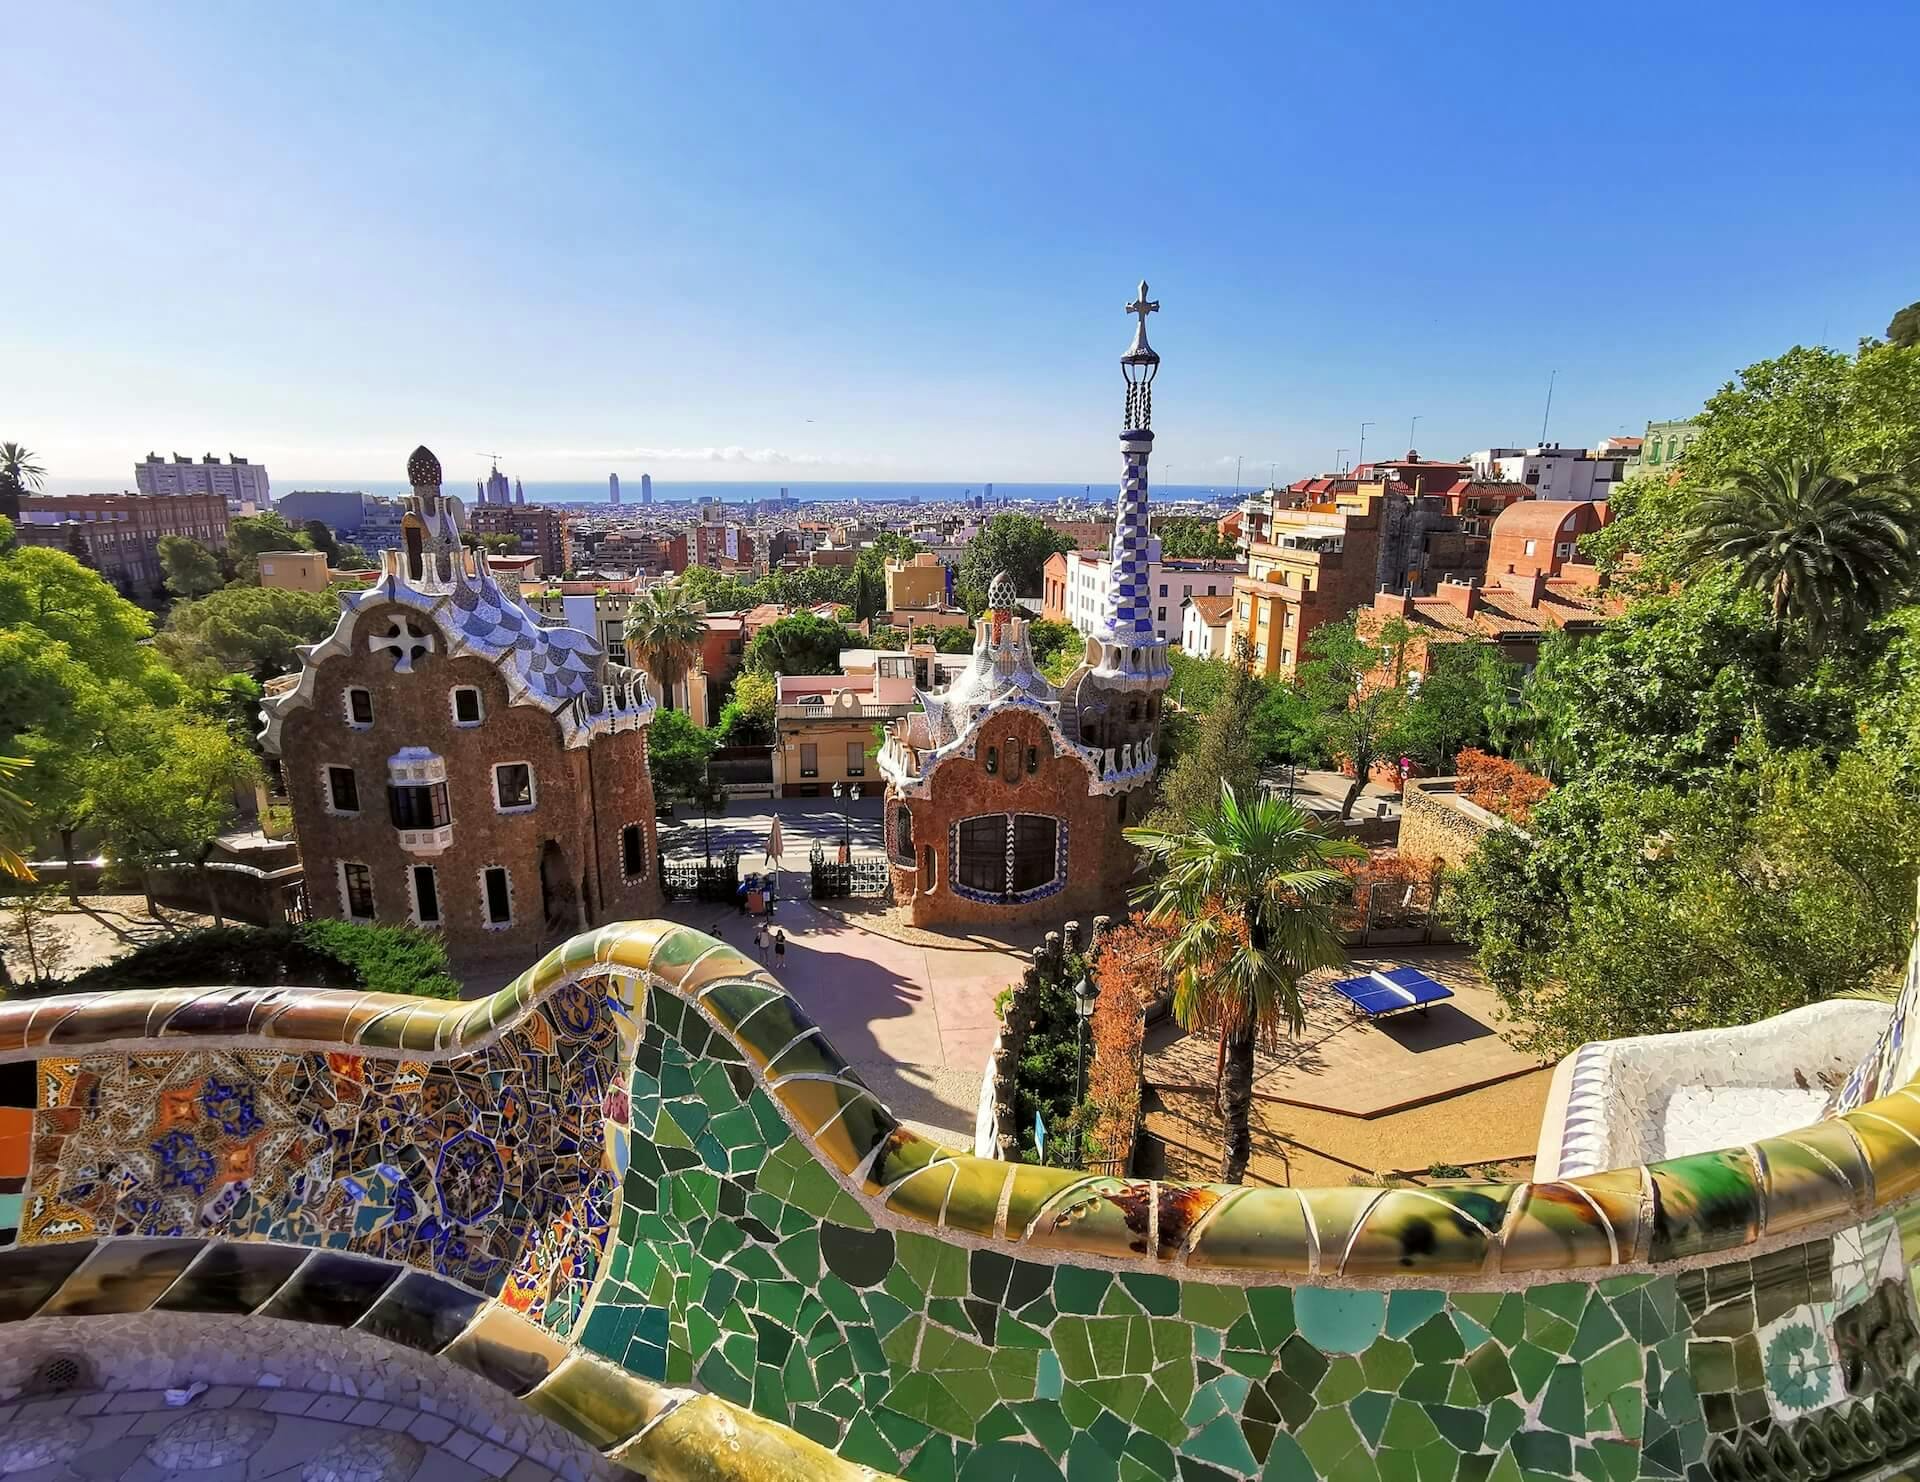 Park Güell with the city of Barcelona in the background